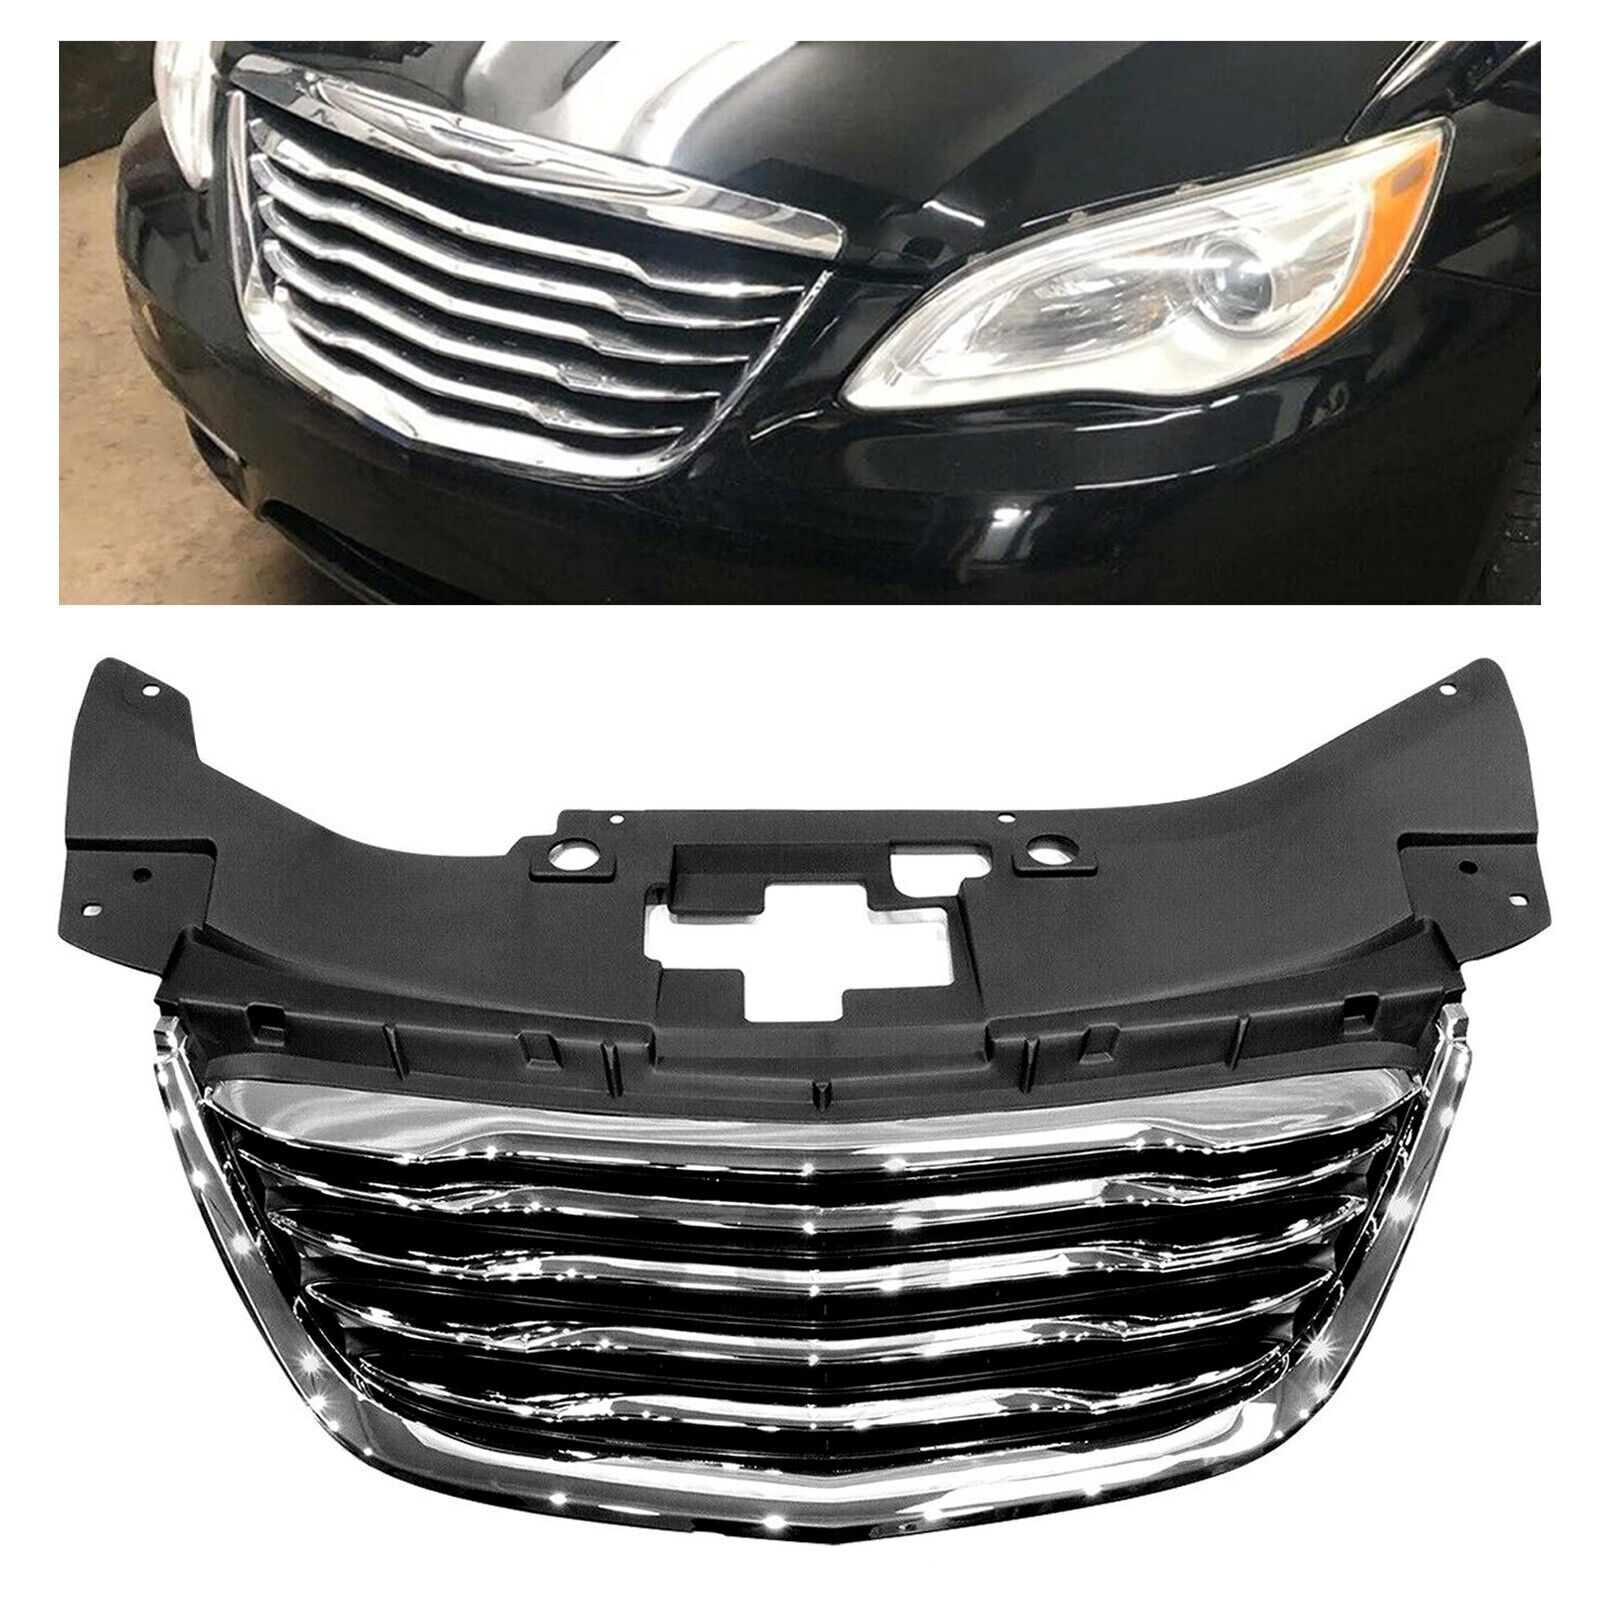 For 2011 thru 2014 Chrysler 200 Chrome Front Hood Grille Grill New 68082050AE